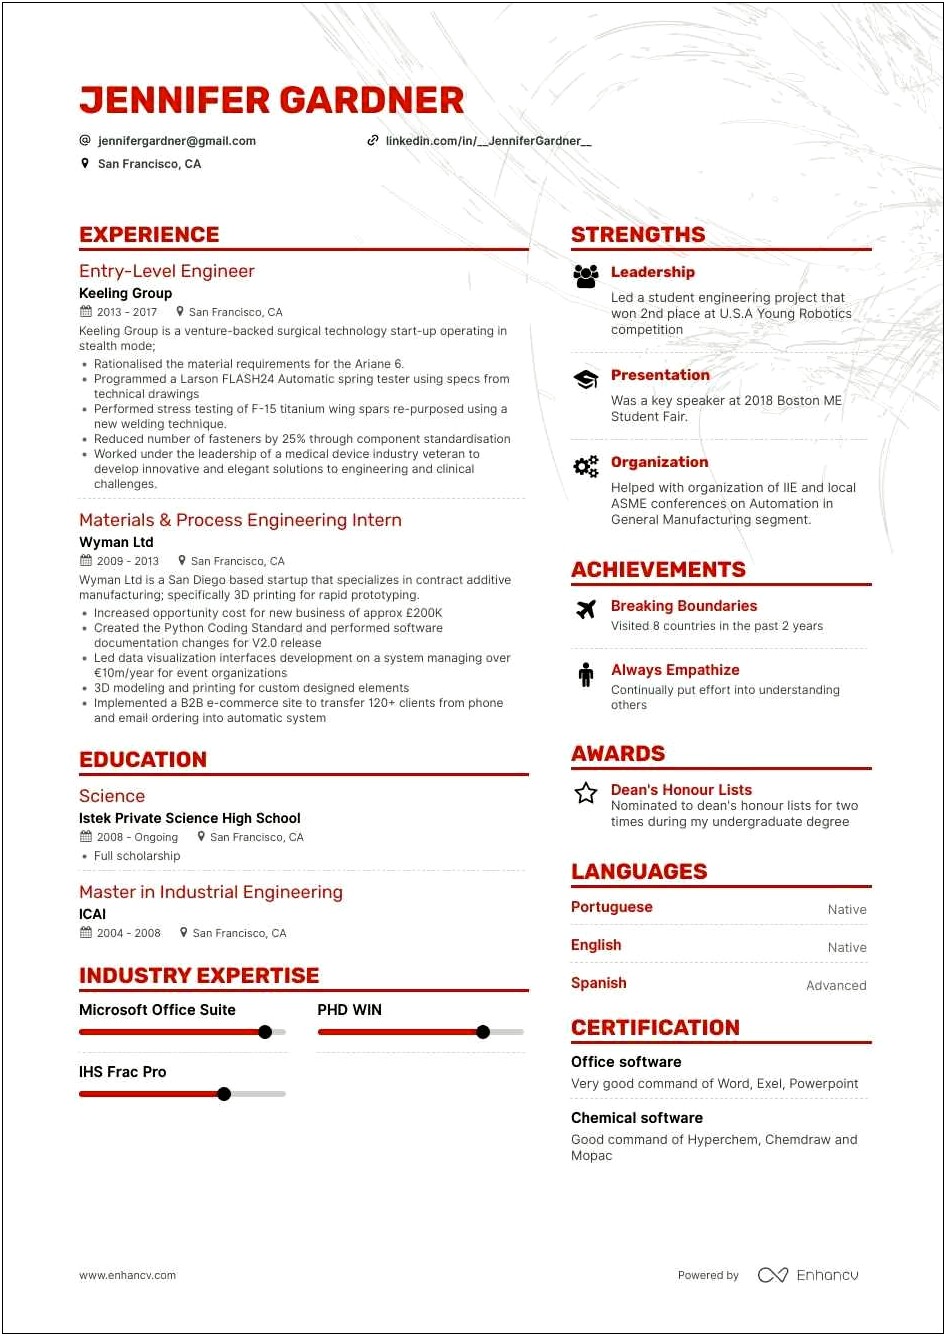 Do Internships Count As Work Experience On Resume